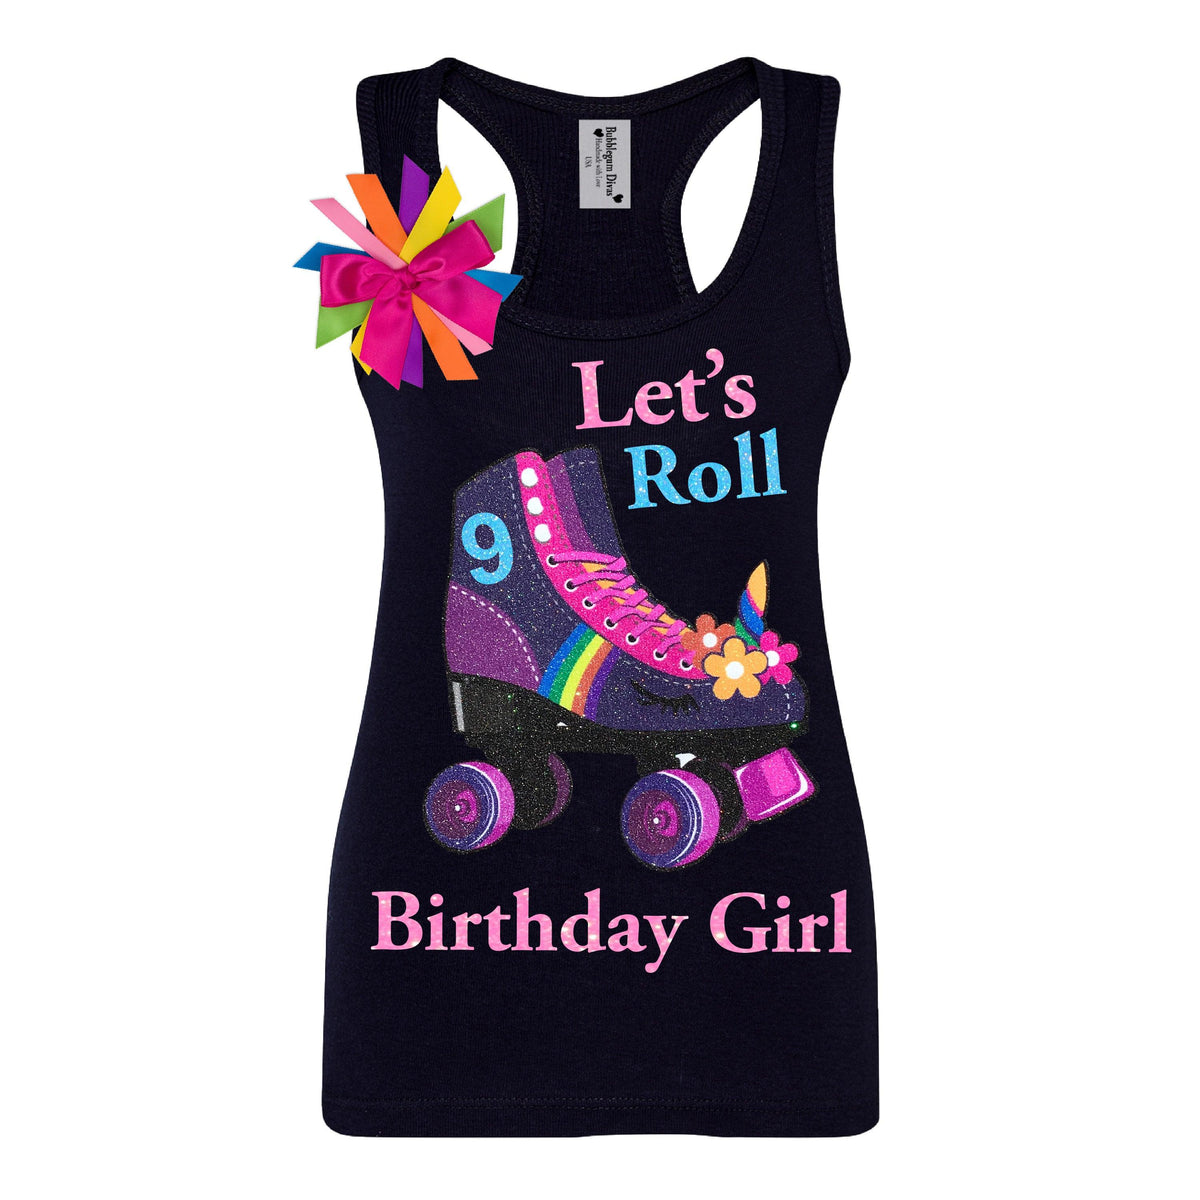 Birthday Must-Have Neon Twilight Roller Skate Tank Top for Girls